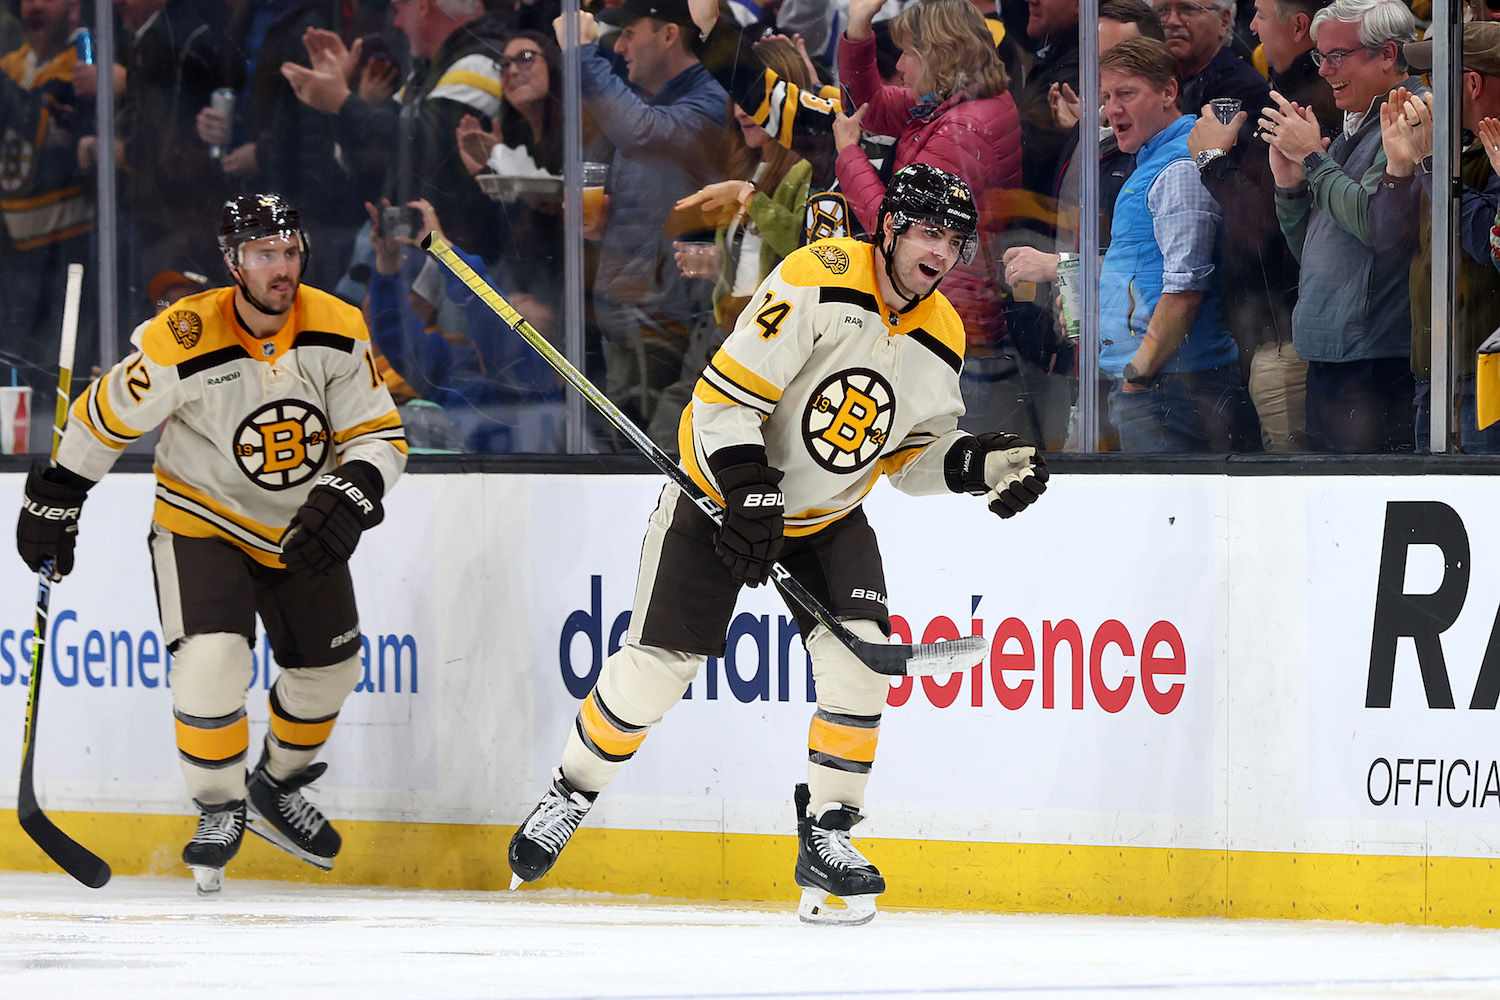 BOSTON, MASSACHUSETTS - NOVEMBER 02:Jake DeBrusk #74 of the Boston Bruins celebrates after scoring against the Toronto Maple Leafs in the shootout at TD Garden on November 02, 2023 in Boston, Massachusetts. The Bruins defeat the Maple Leafs 3-2 in overtime. (Photo by Maddie Meyer/Getty Images)